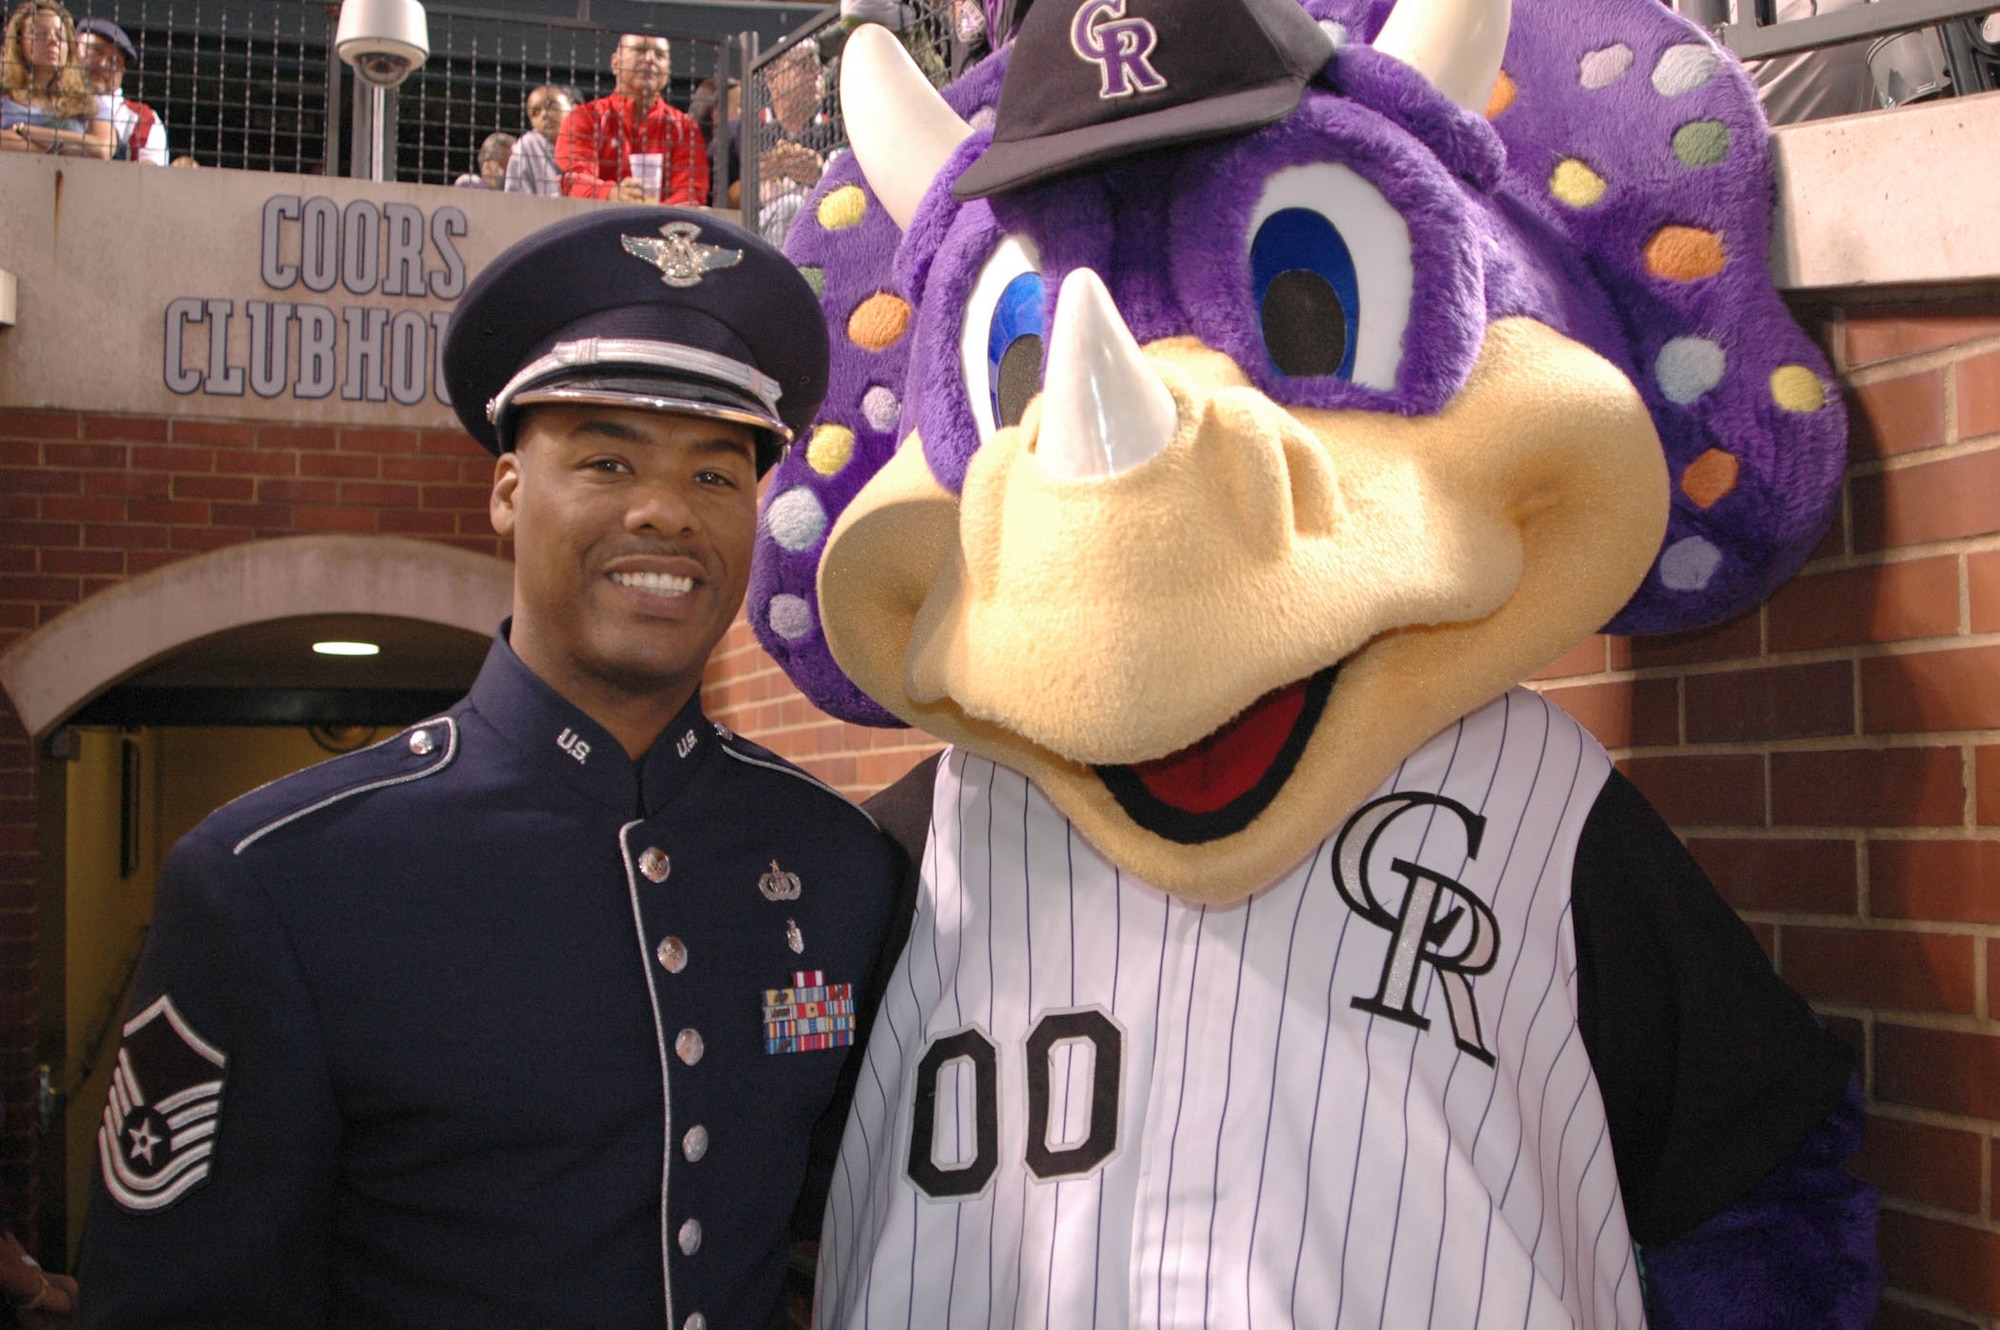 Master Sgt. Aaron Miles, a vocalist with the Air Force Reserve Command Band, has his photo taken with "Dinger the Dinosaur" July 4 at Coors Field in Denver. Sergeant Miles set a patriotic tone by presenting the National Anthem to more than 51,000 fans, and during the game?s seventh-inning stretch, he sang God Bless America to the roaring crowd in celebration of Independence Day. Coors Field is home to the Major League Baseball's Colorado Rockies. Dinger the Dinosaur is the team?s mascot. (U.S. Air Force photo/Ann Skarban)